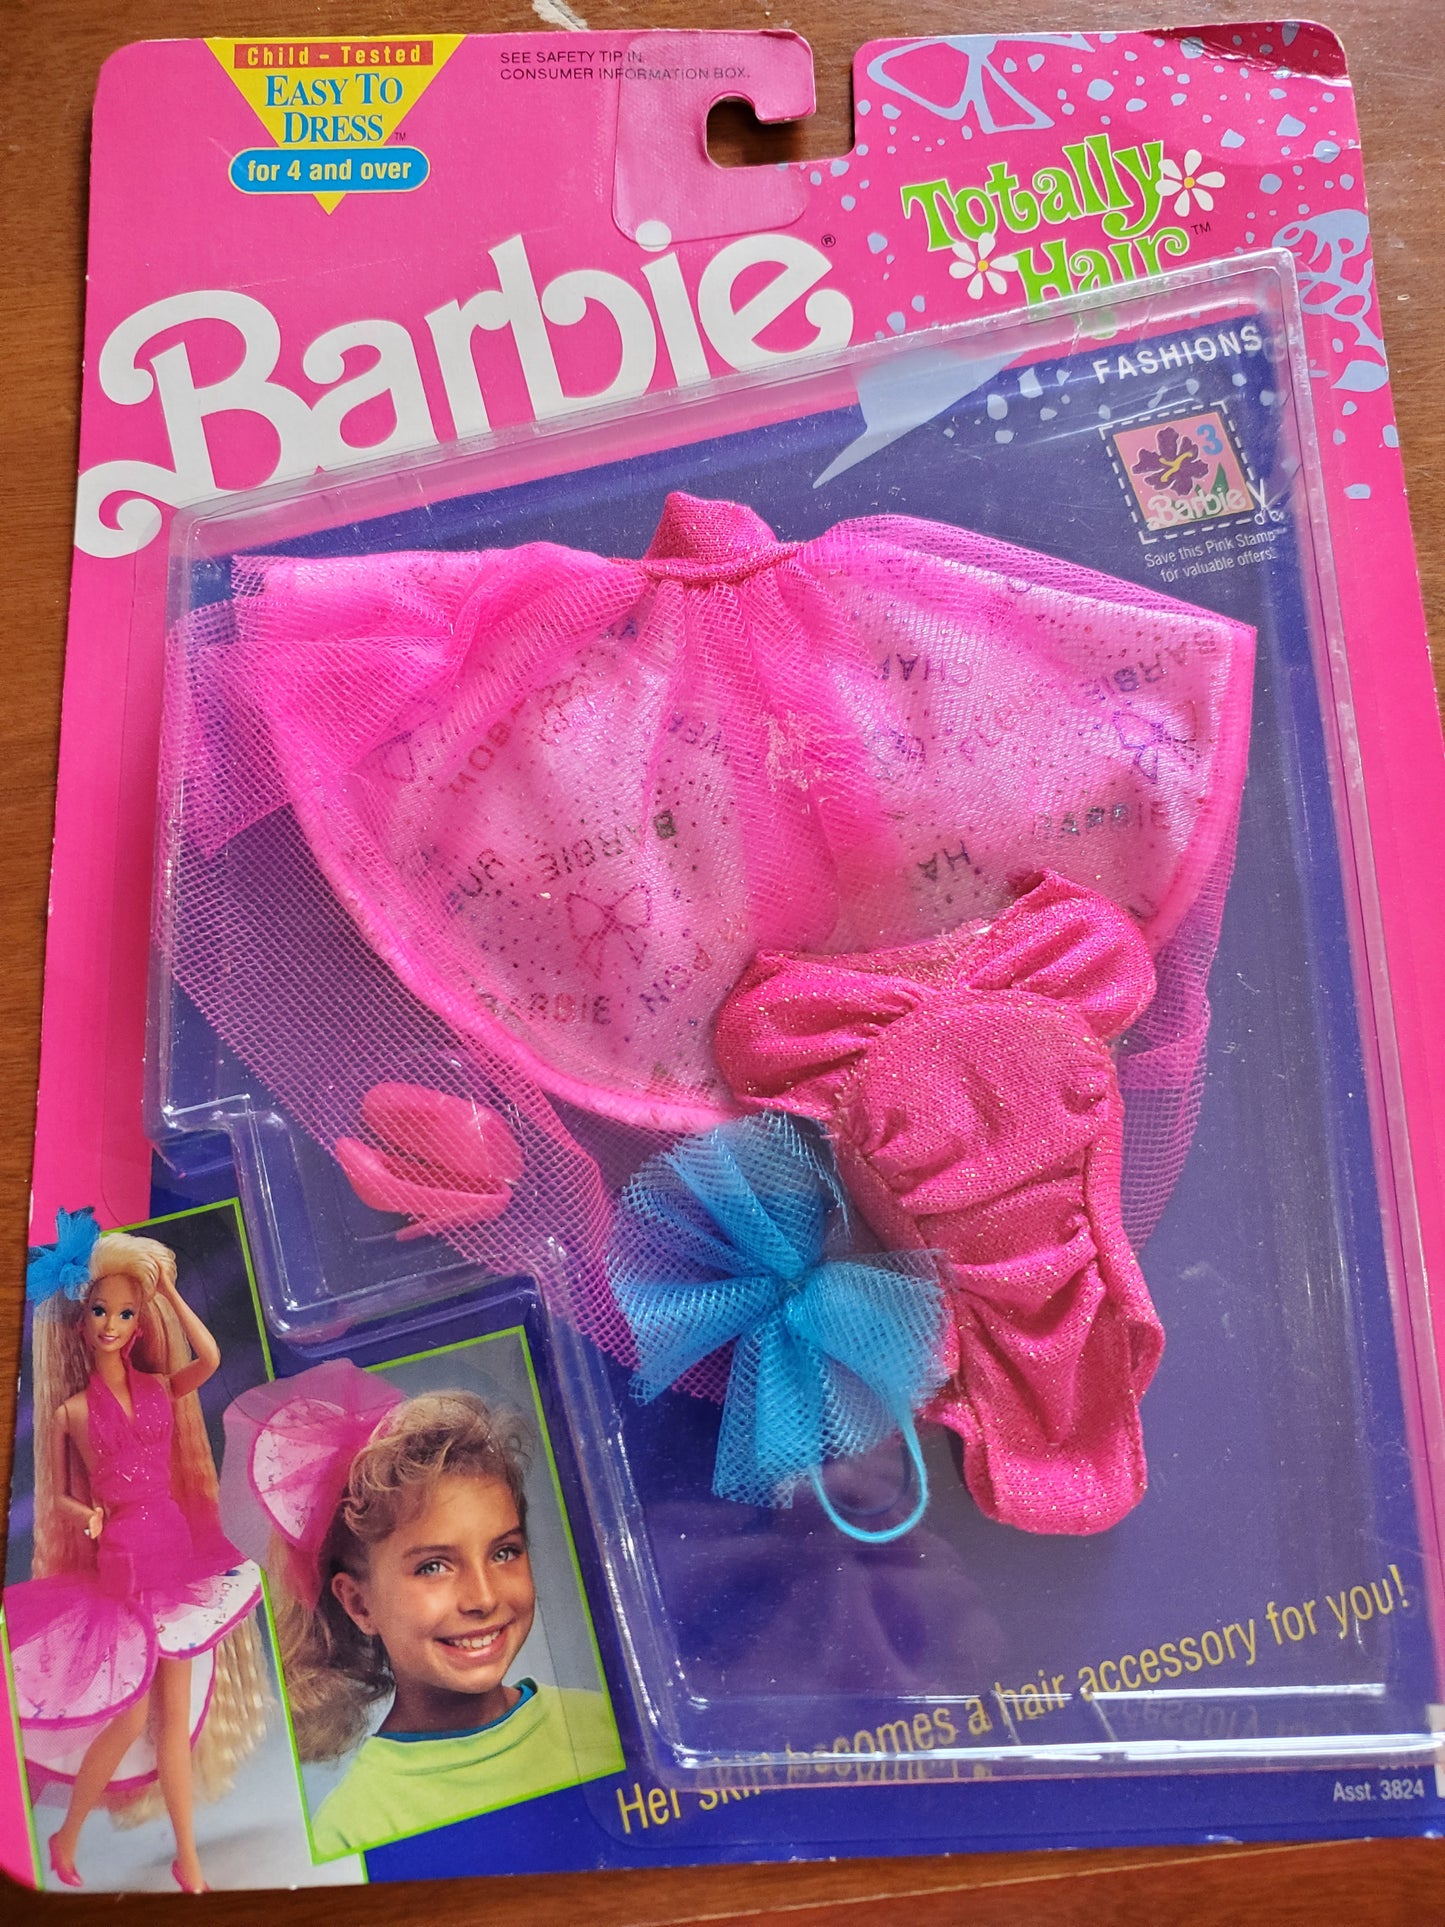 Totally Hair Fashion - Barbie -Mint on card - 1991 - Pink dress